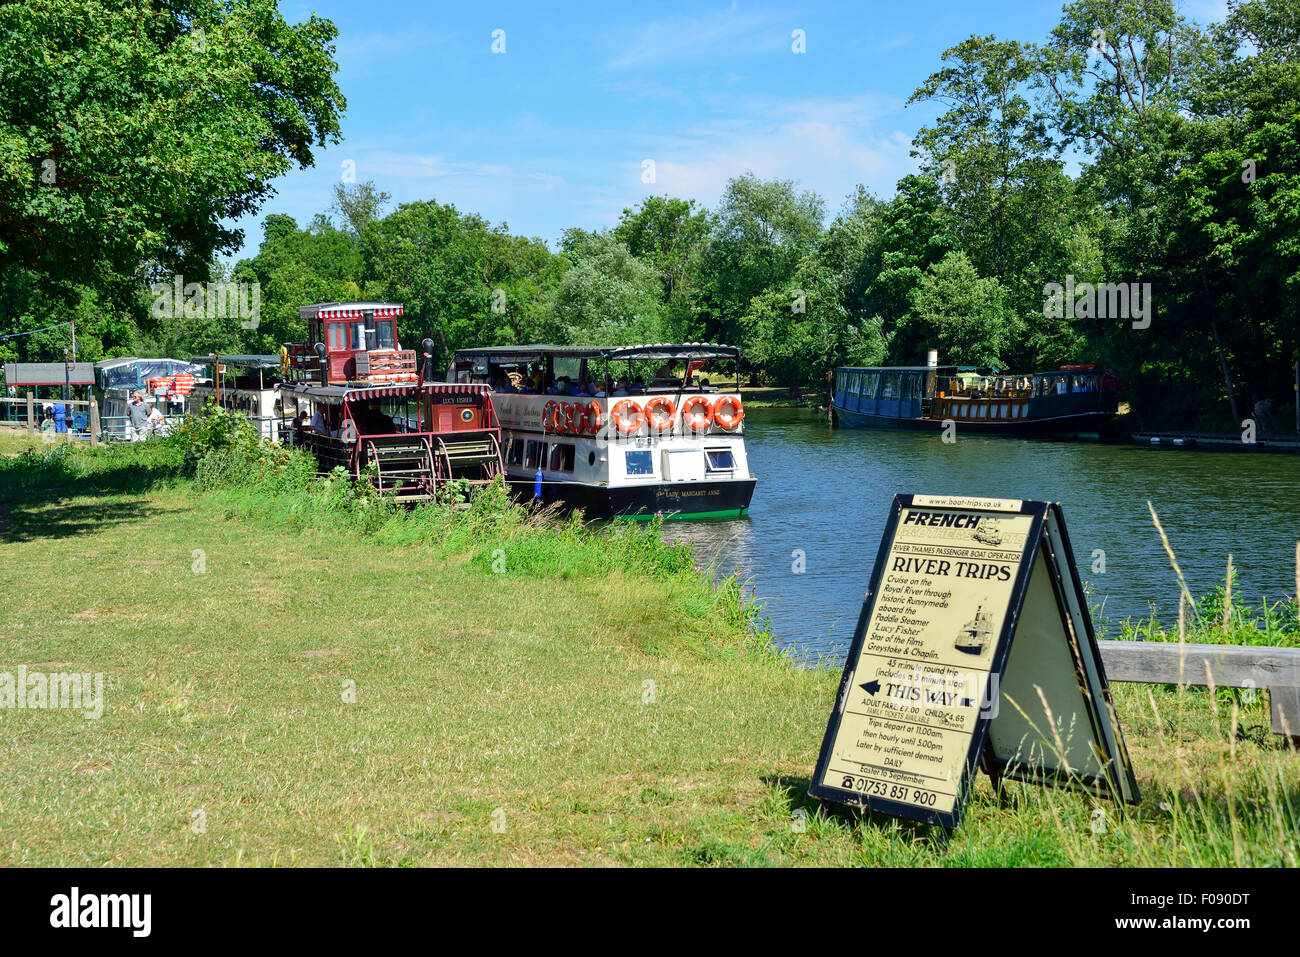 French Brothers River Thames cruise boats, Runnymede, Surrey, England, United Kingdom Stock Photo